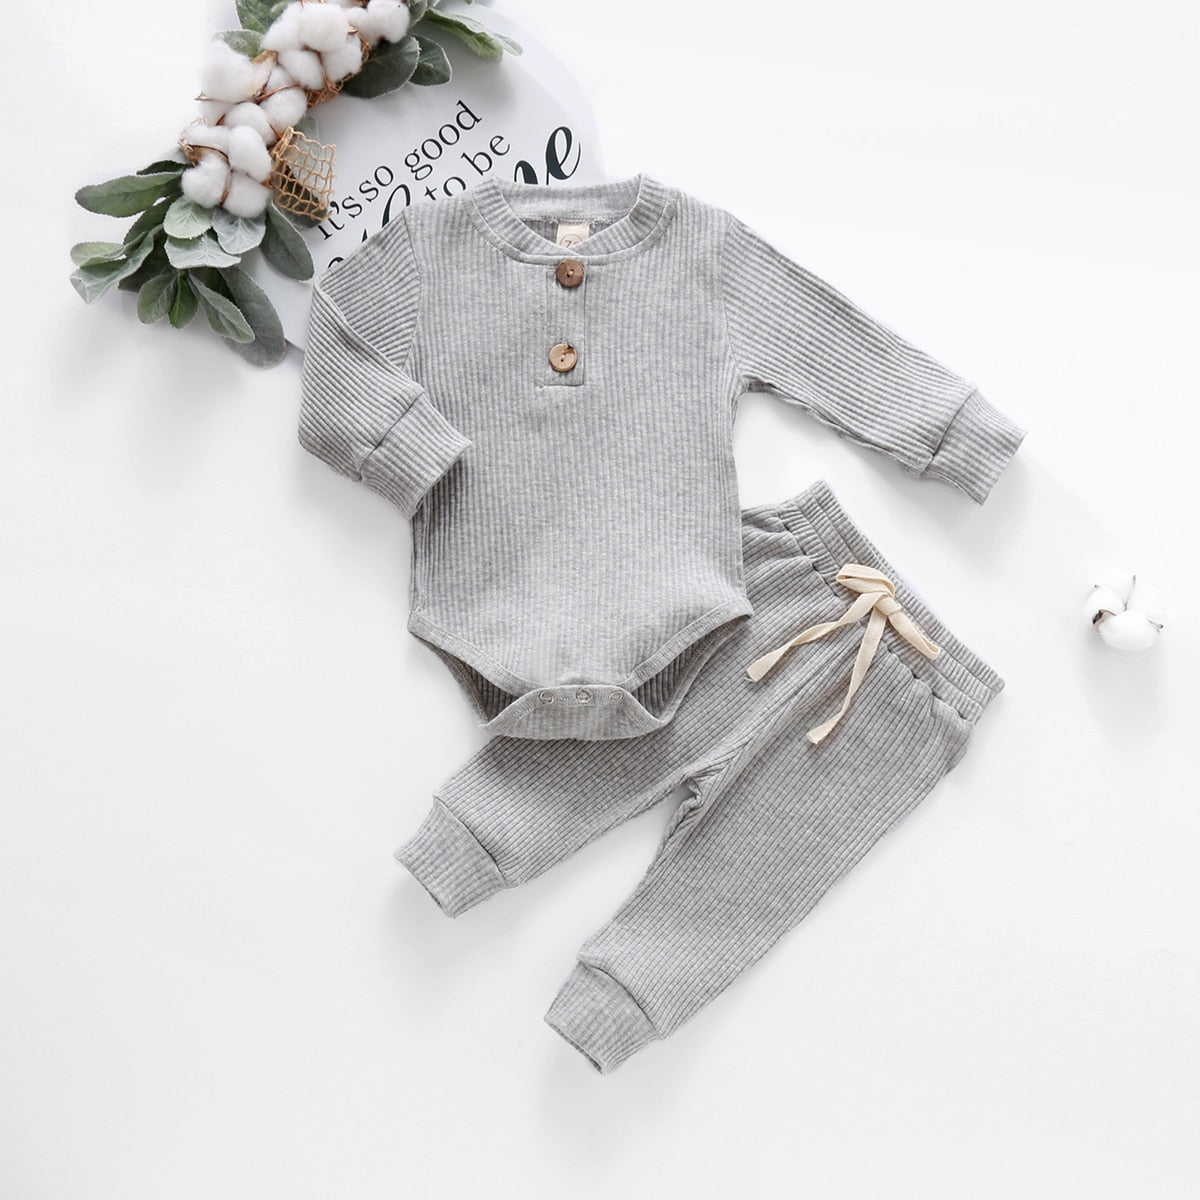 Newborn Baby Spring Clothes Sets